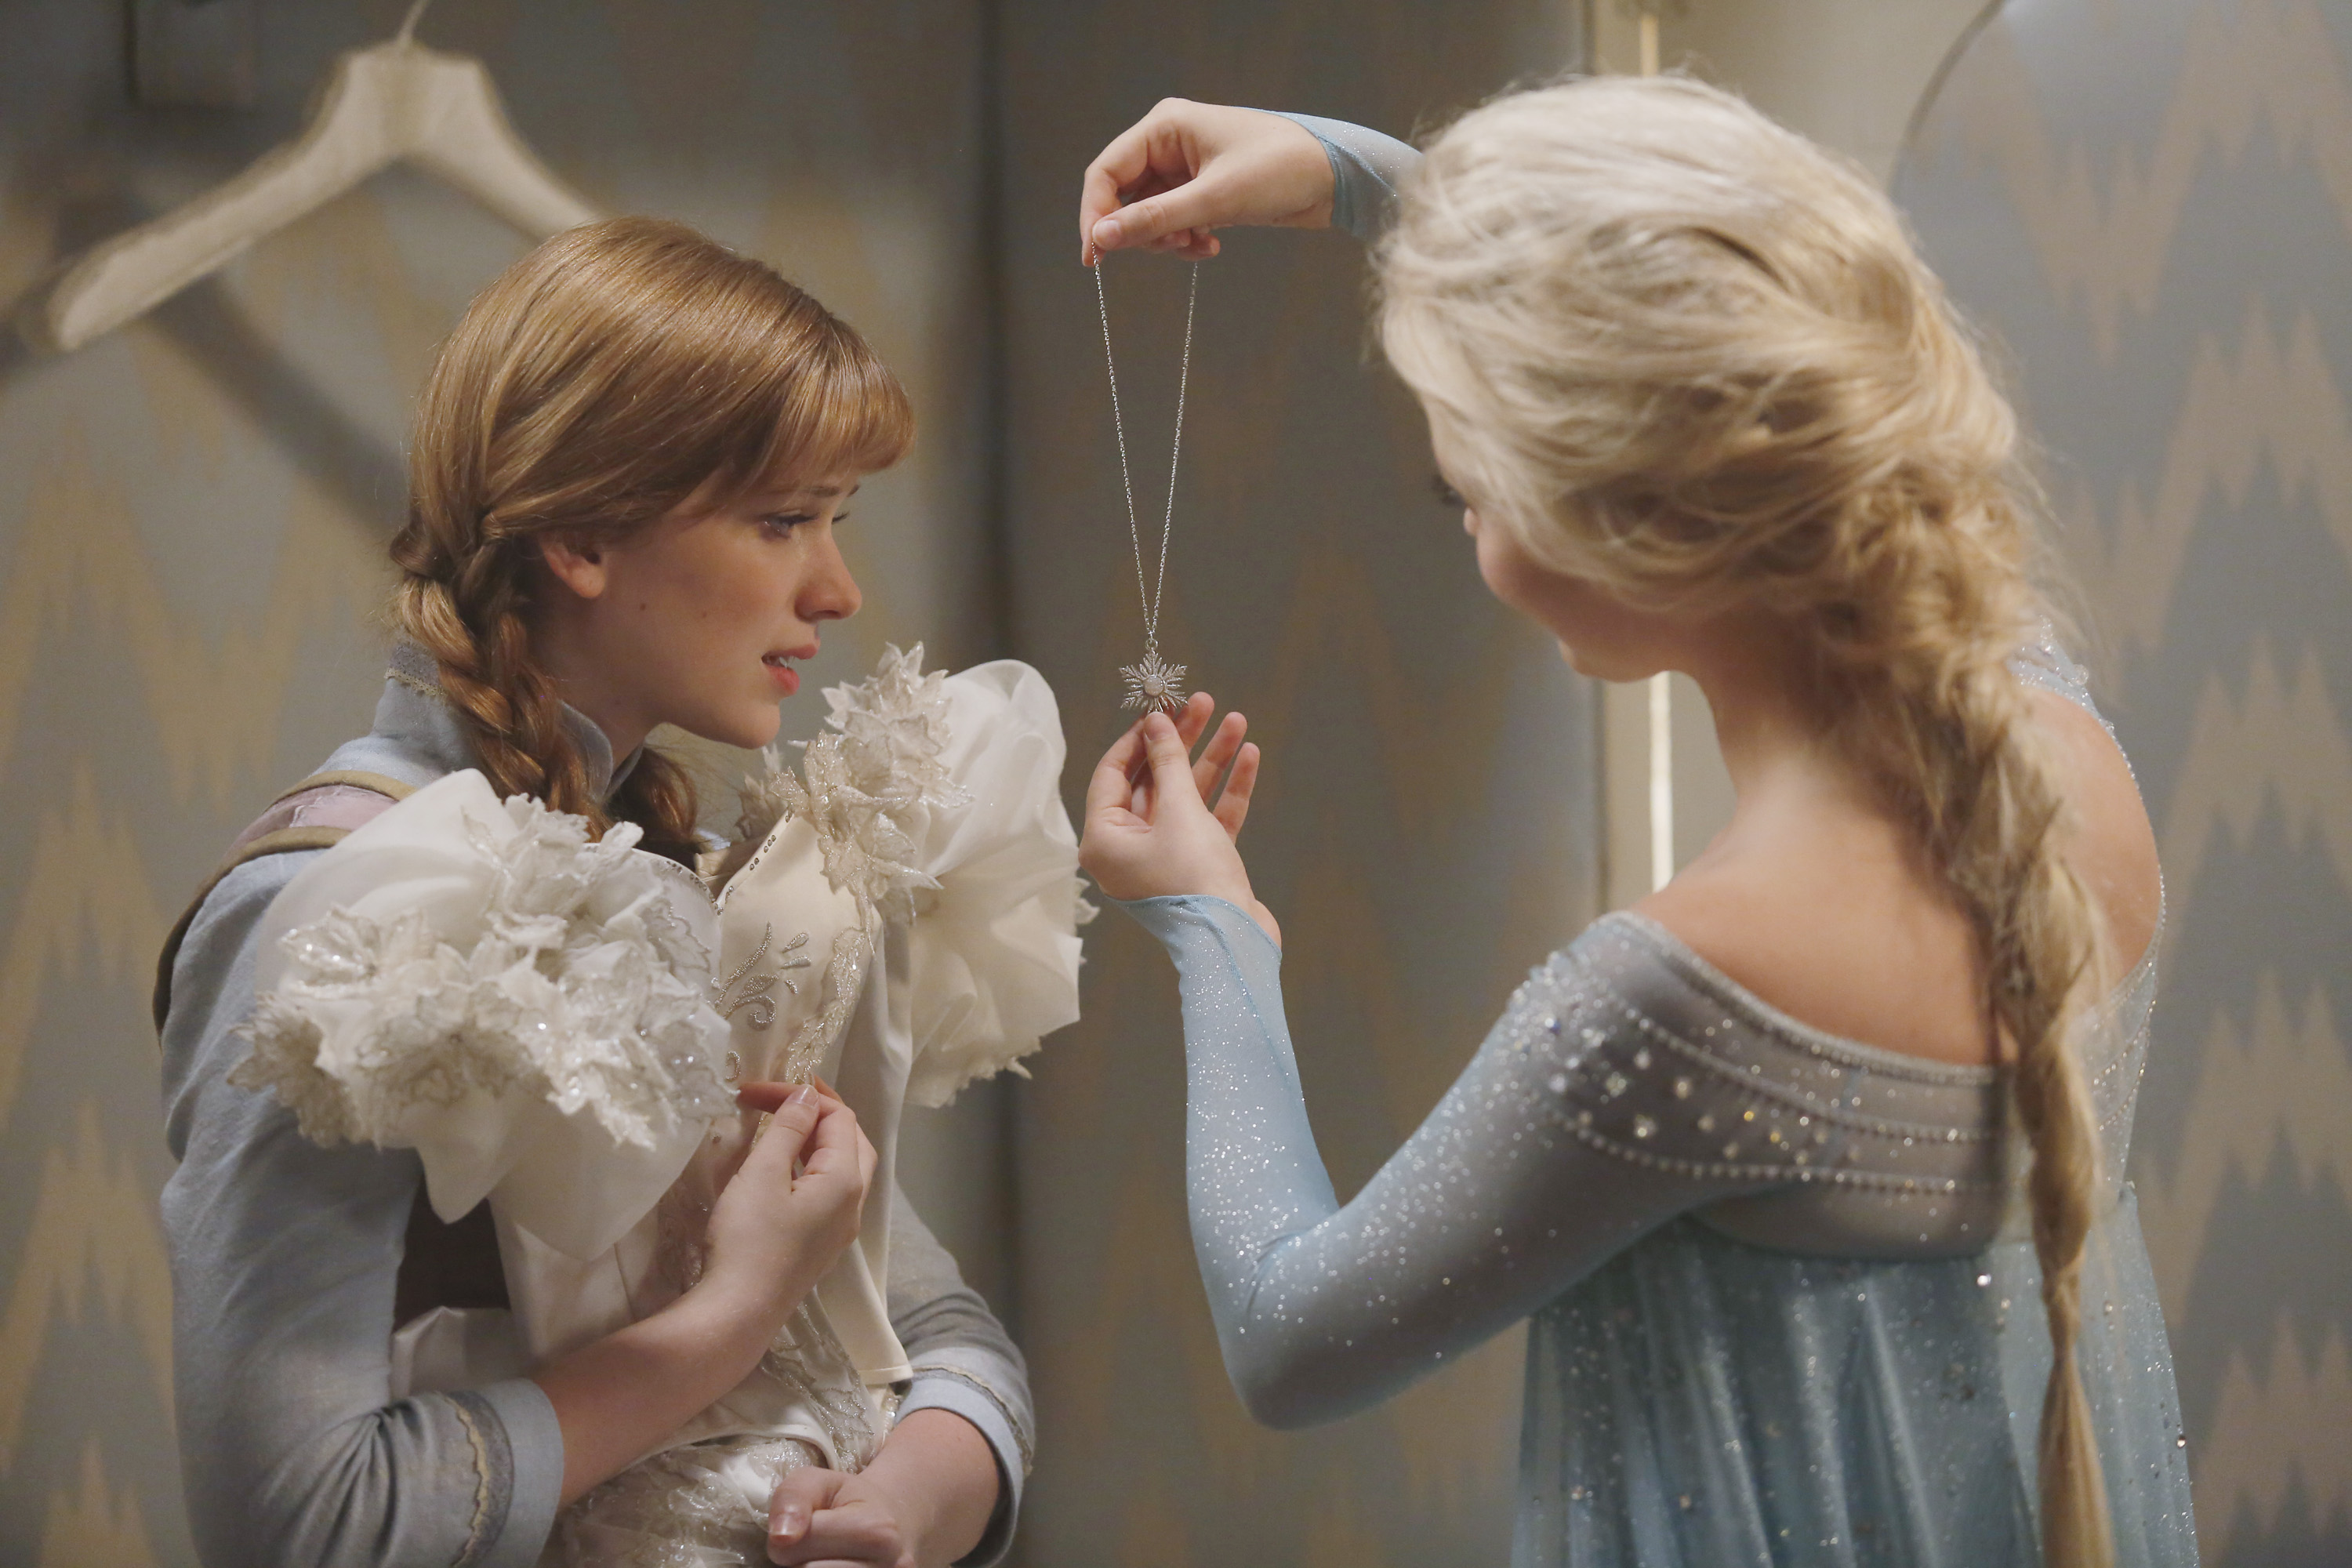 elsa-and-anna-on-once-upon-a-time-frozen-photo-37619631-fanpop